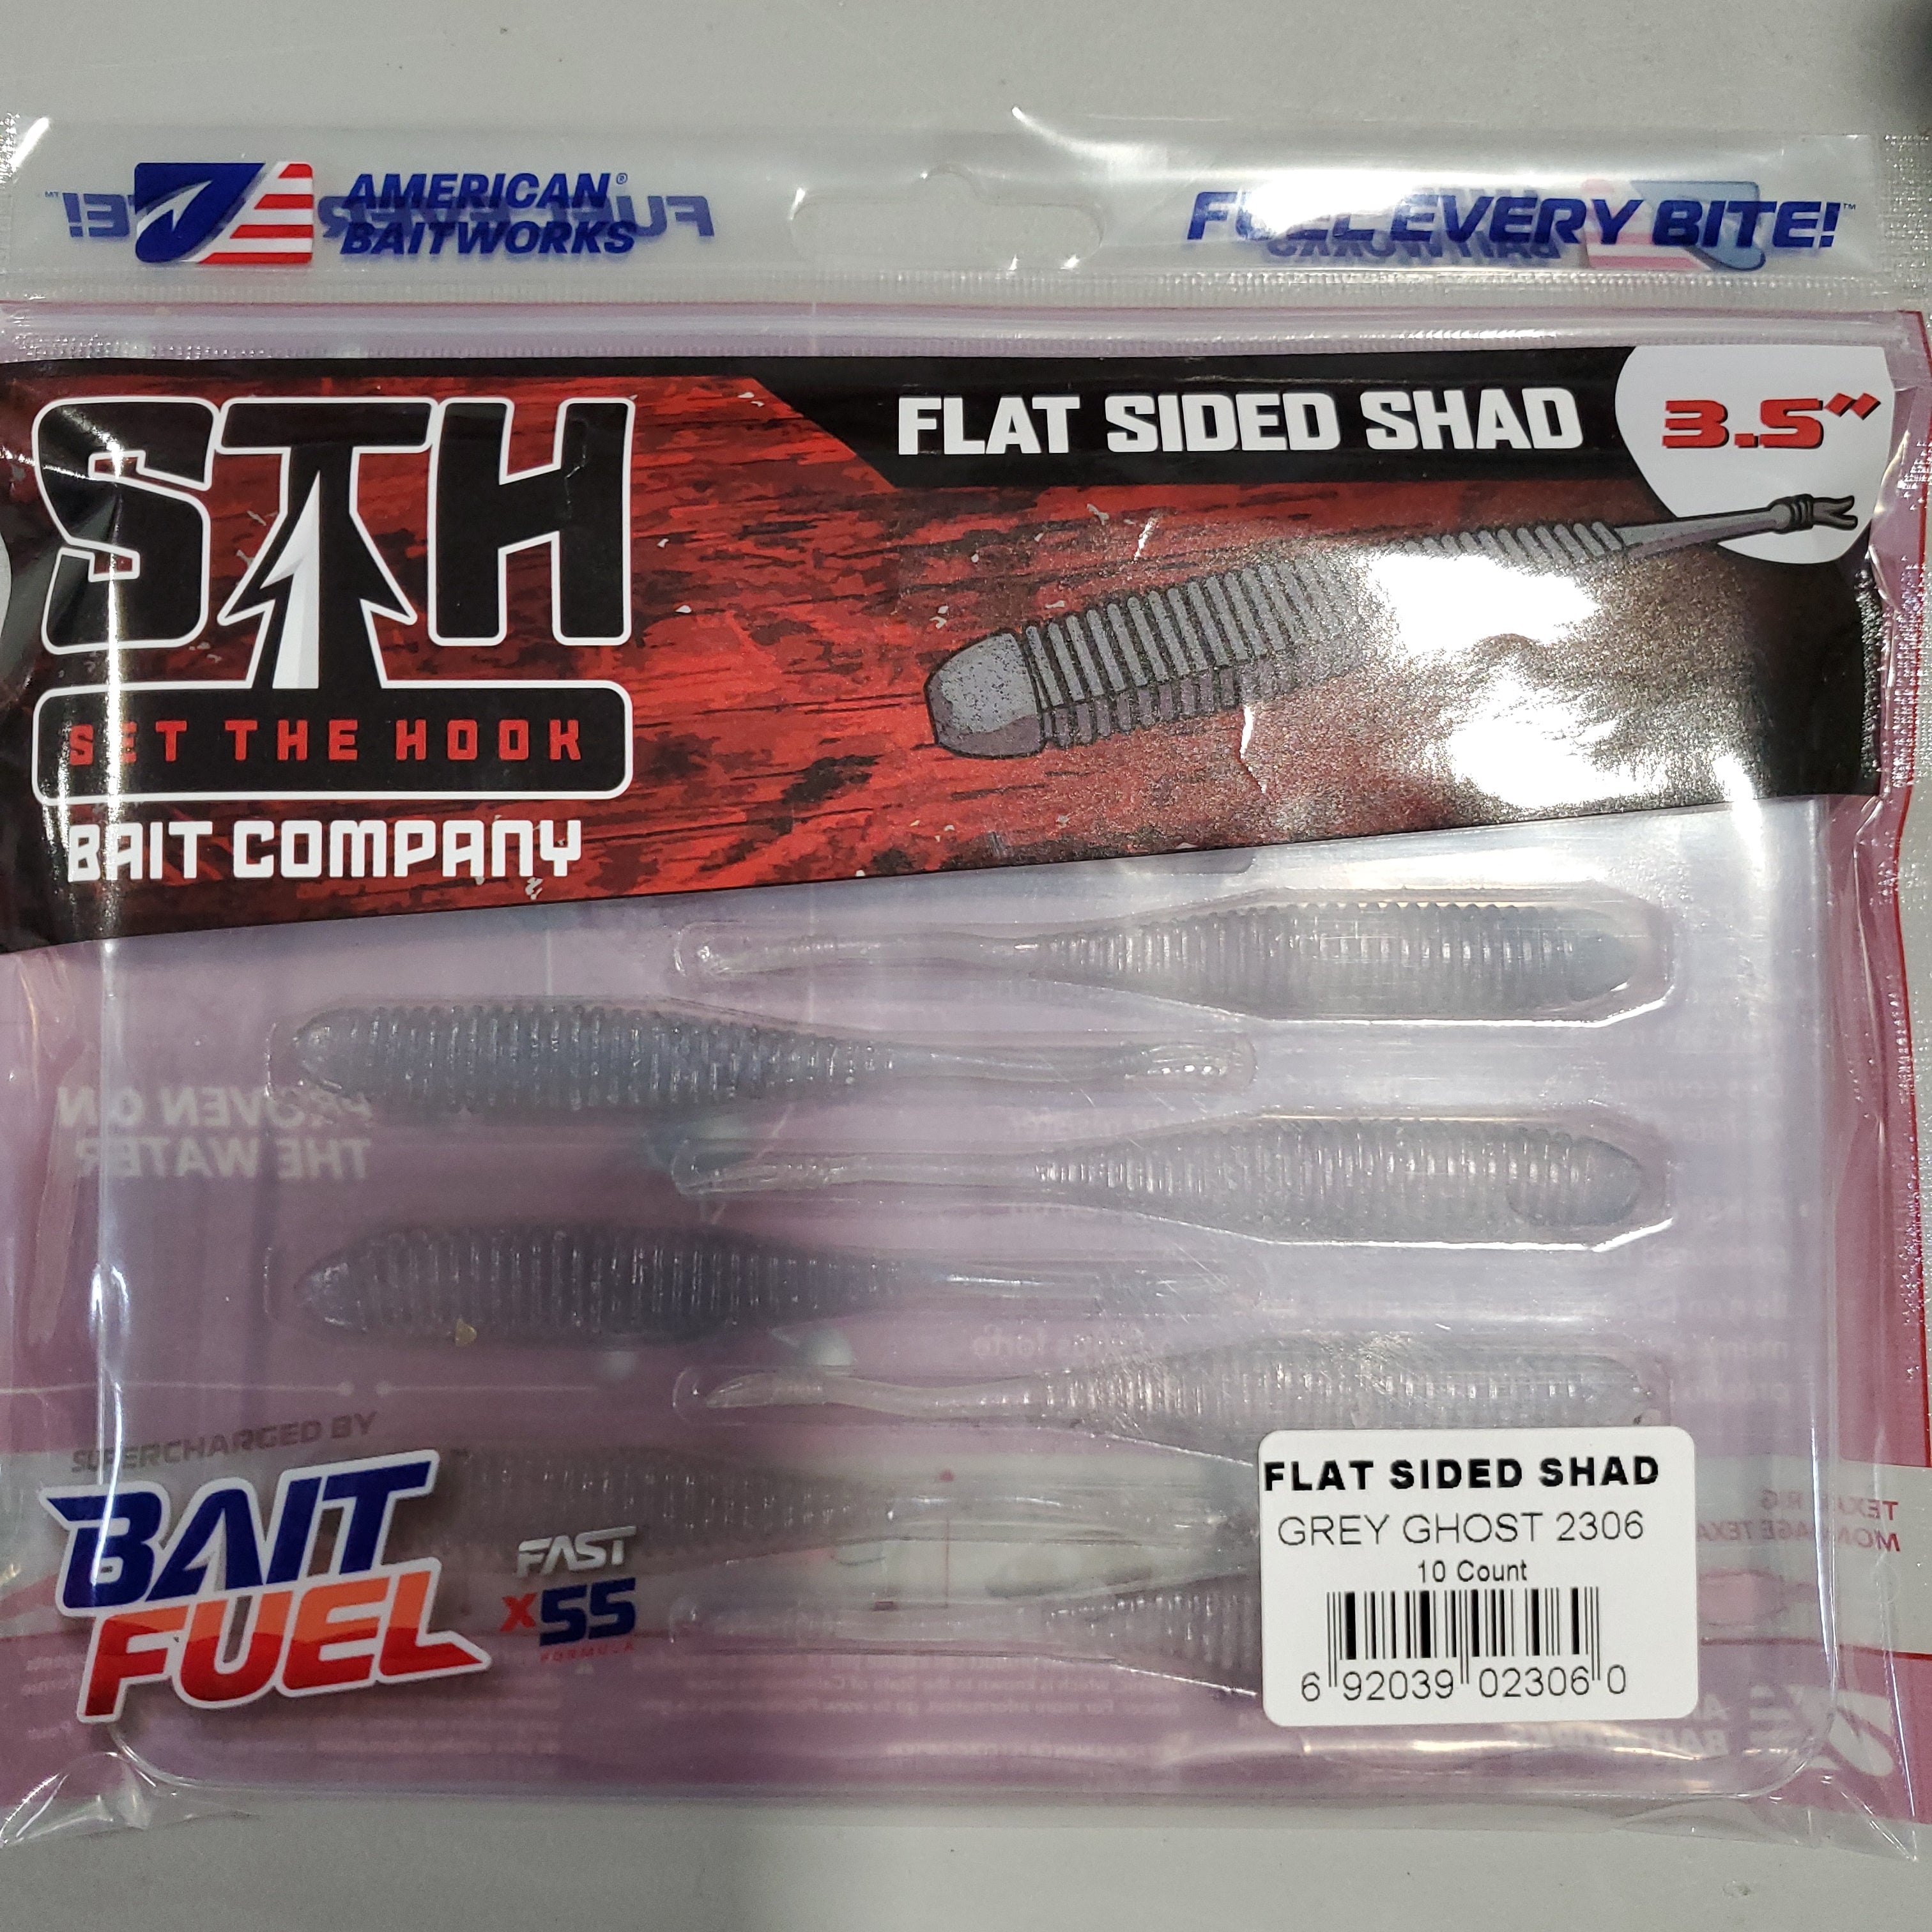 Set The Hook Flat Sided Shad 10 Pk With Bait Fuel - Tackle Depot